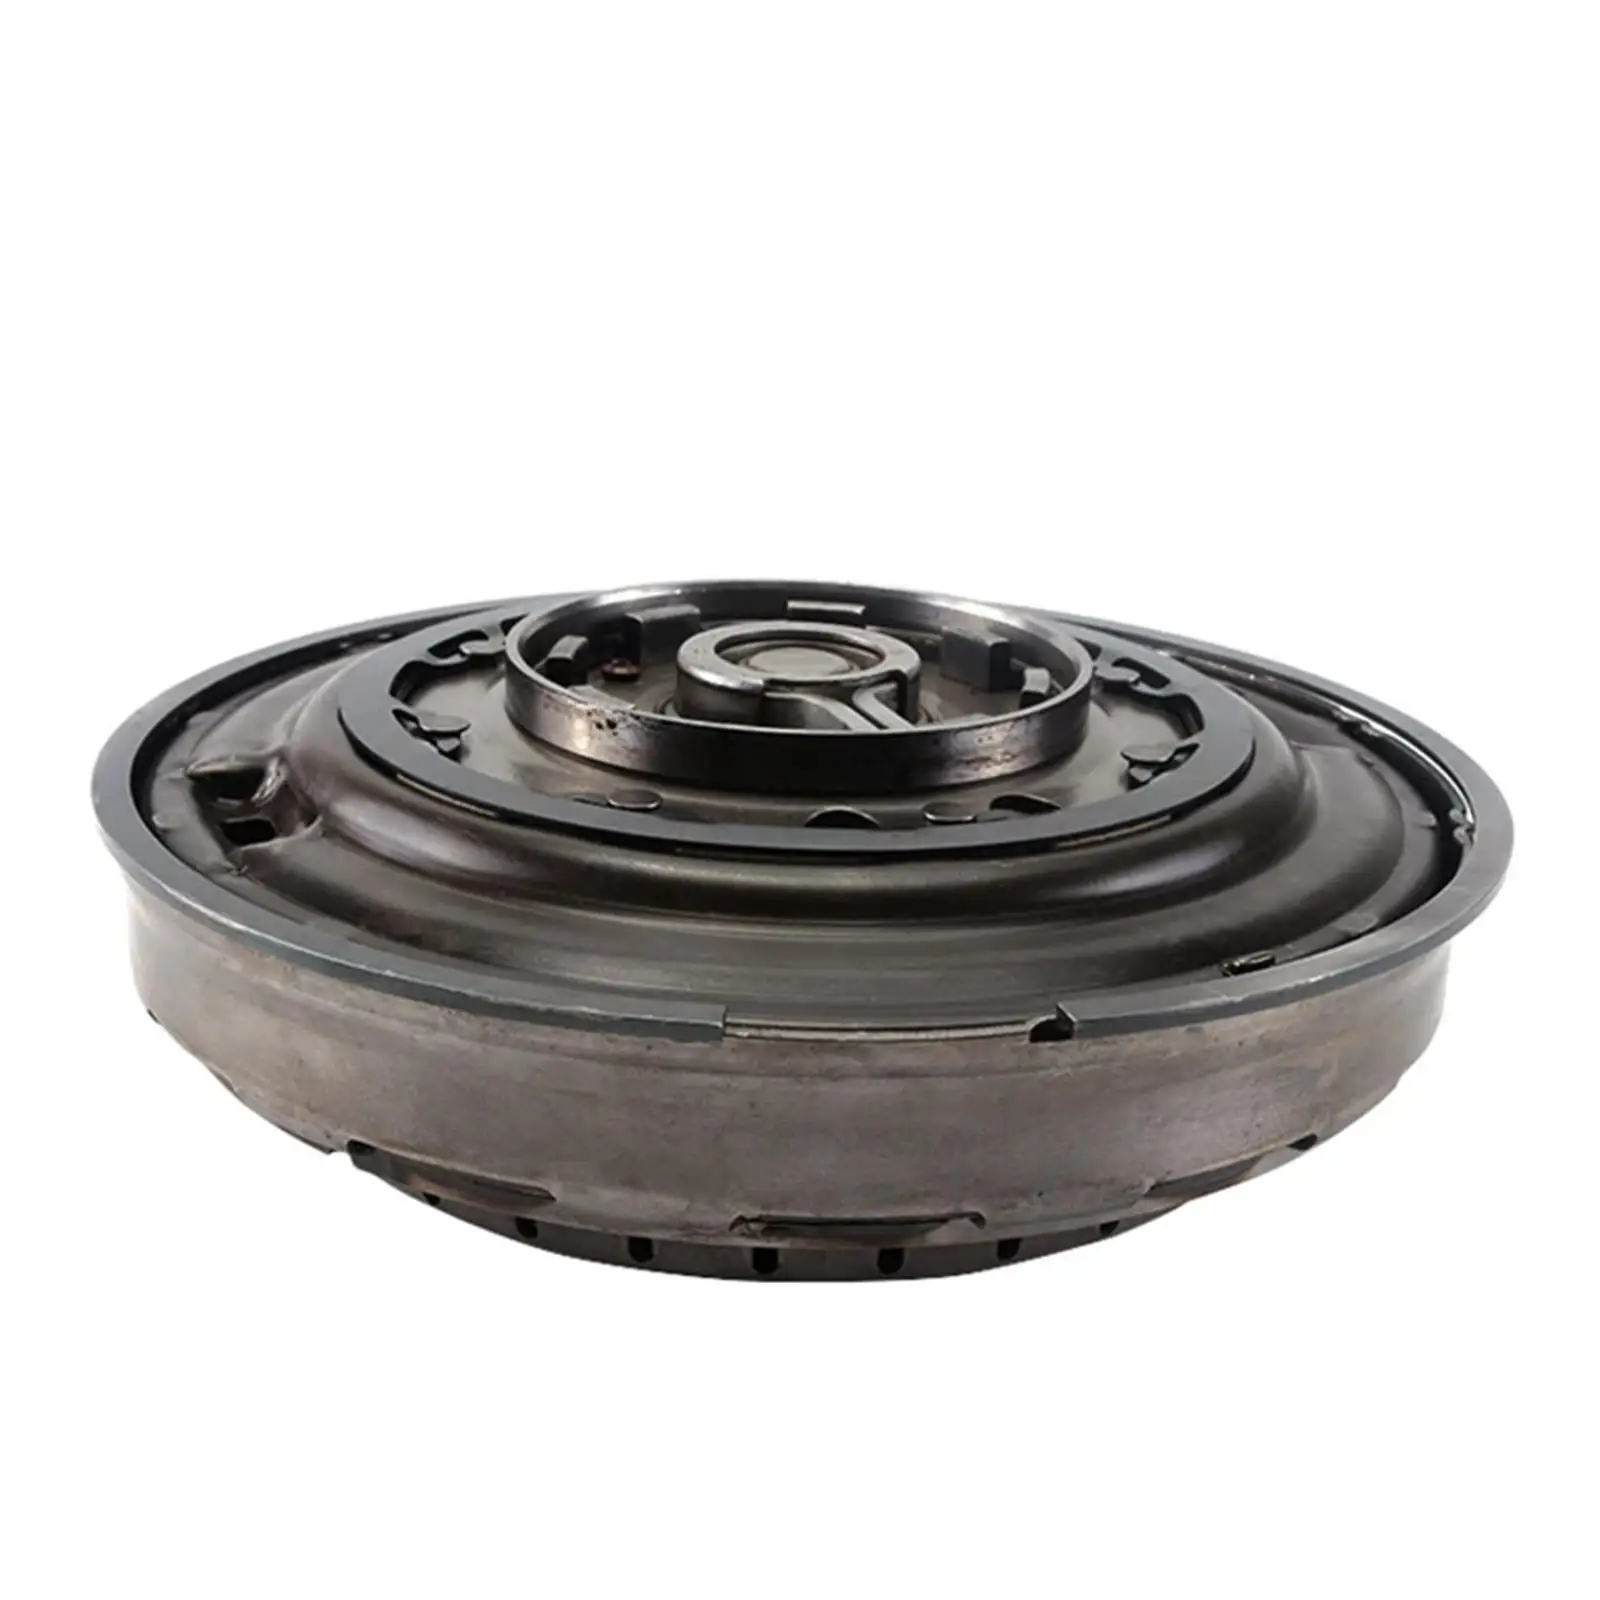 Transmission Clutch Durable Easy to Install Accessory Premium Professional for Volvo